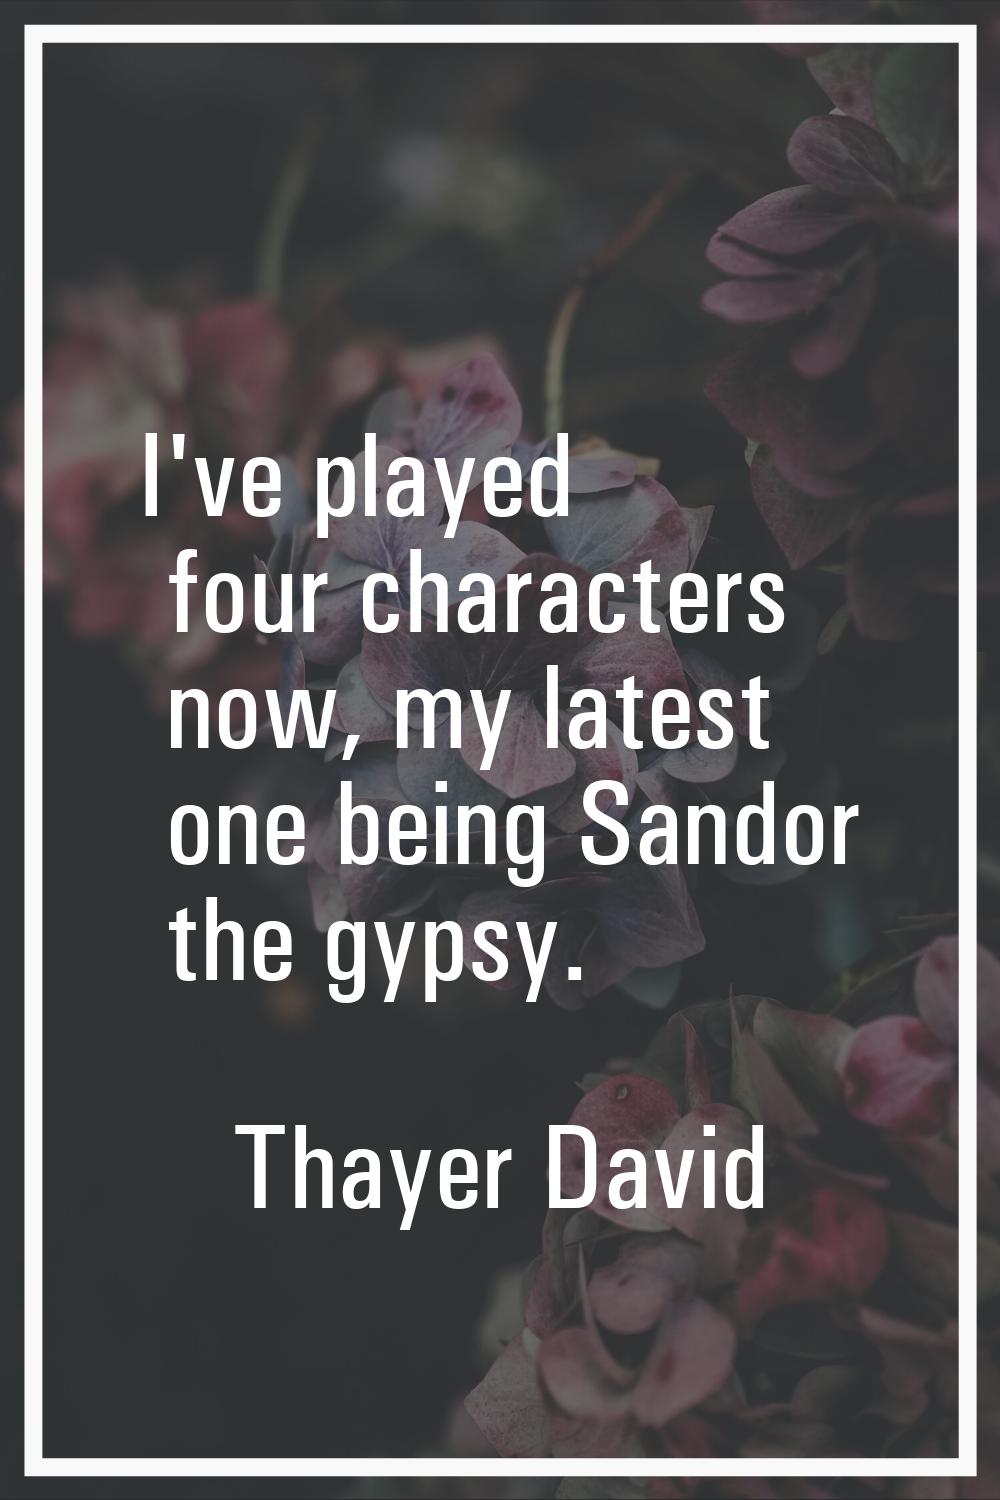 I've played four characters now, my latest one being Sandor the gypsy.